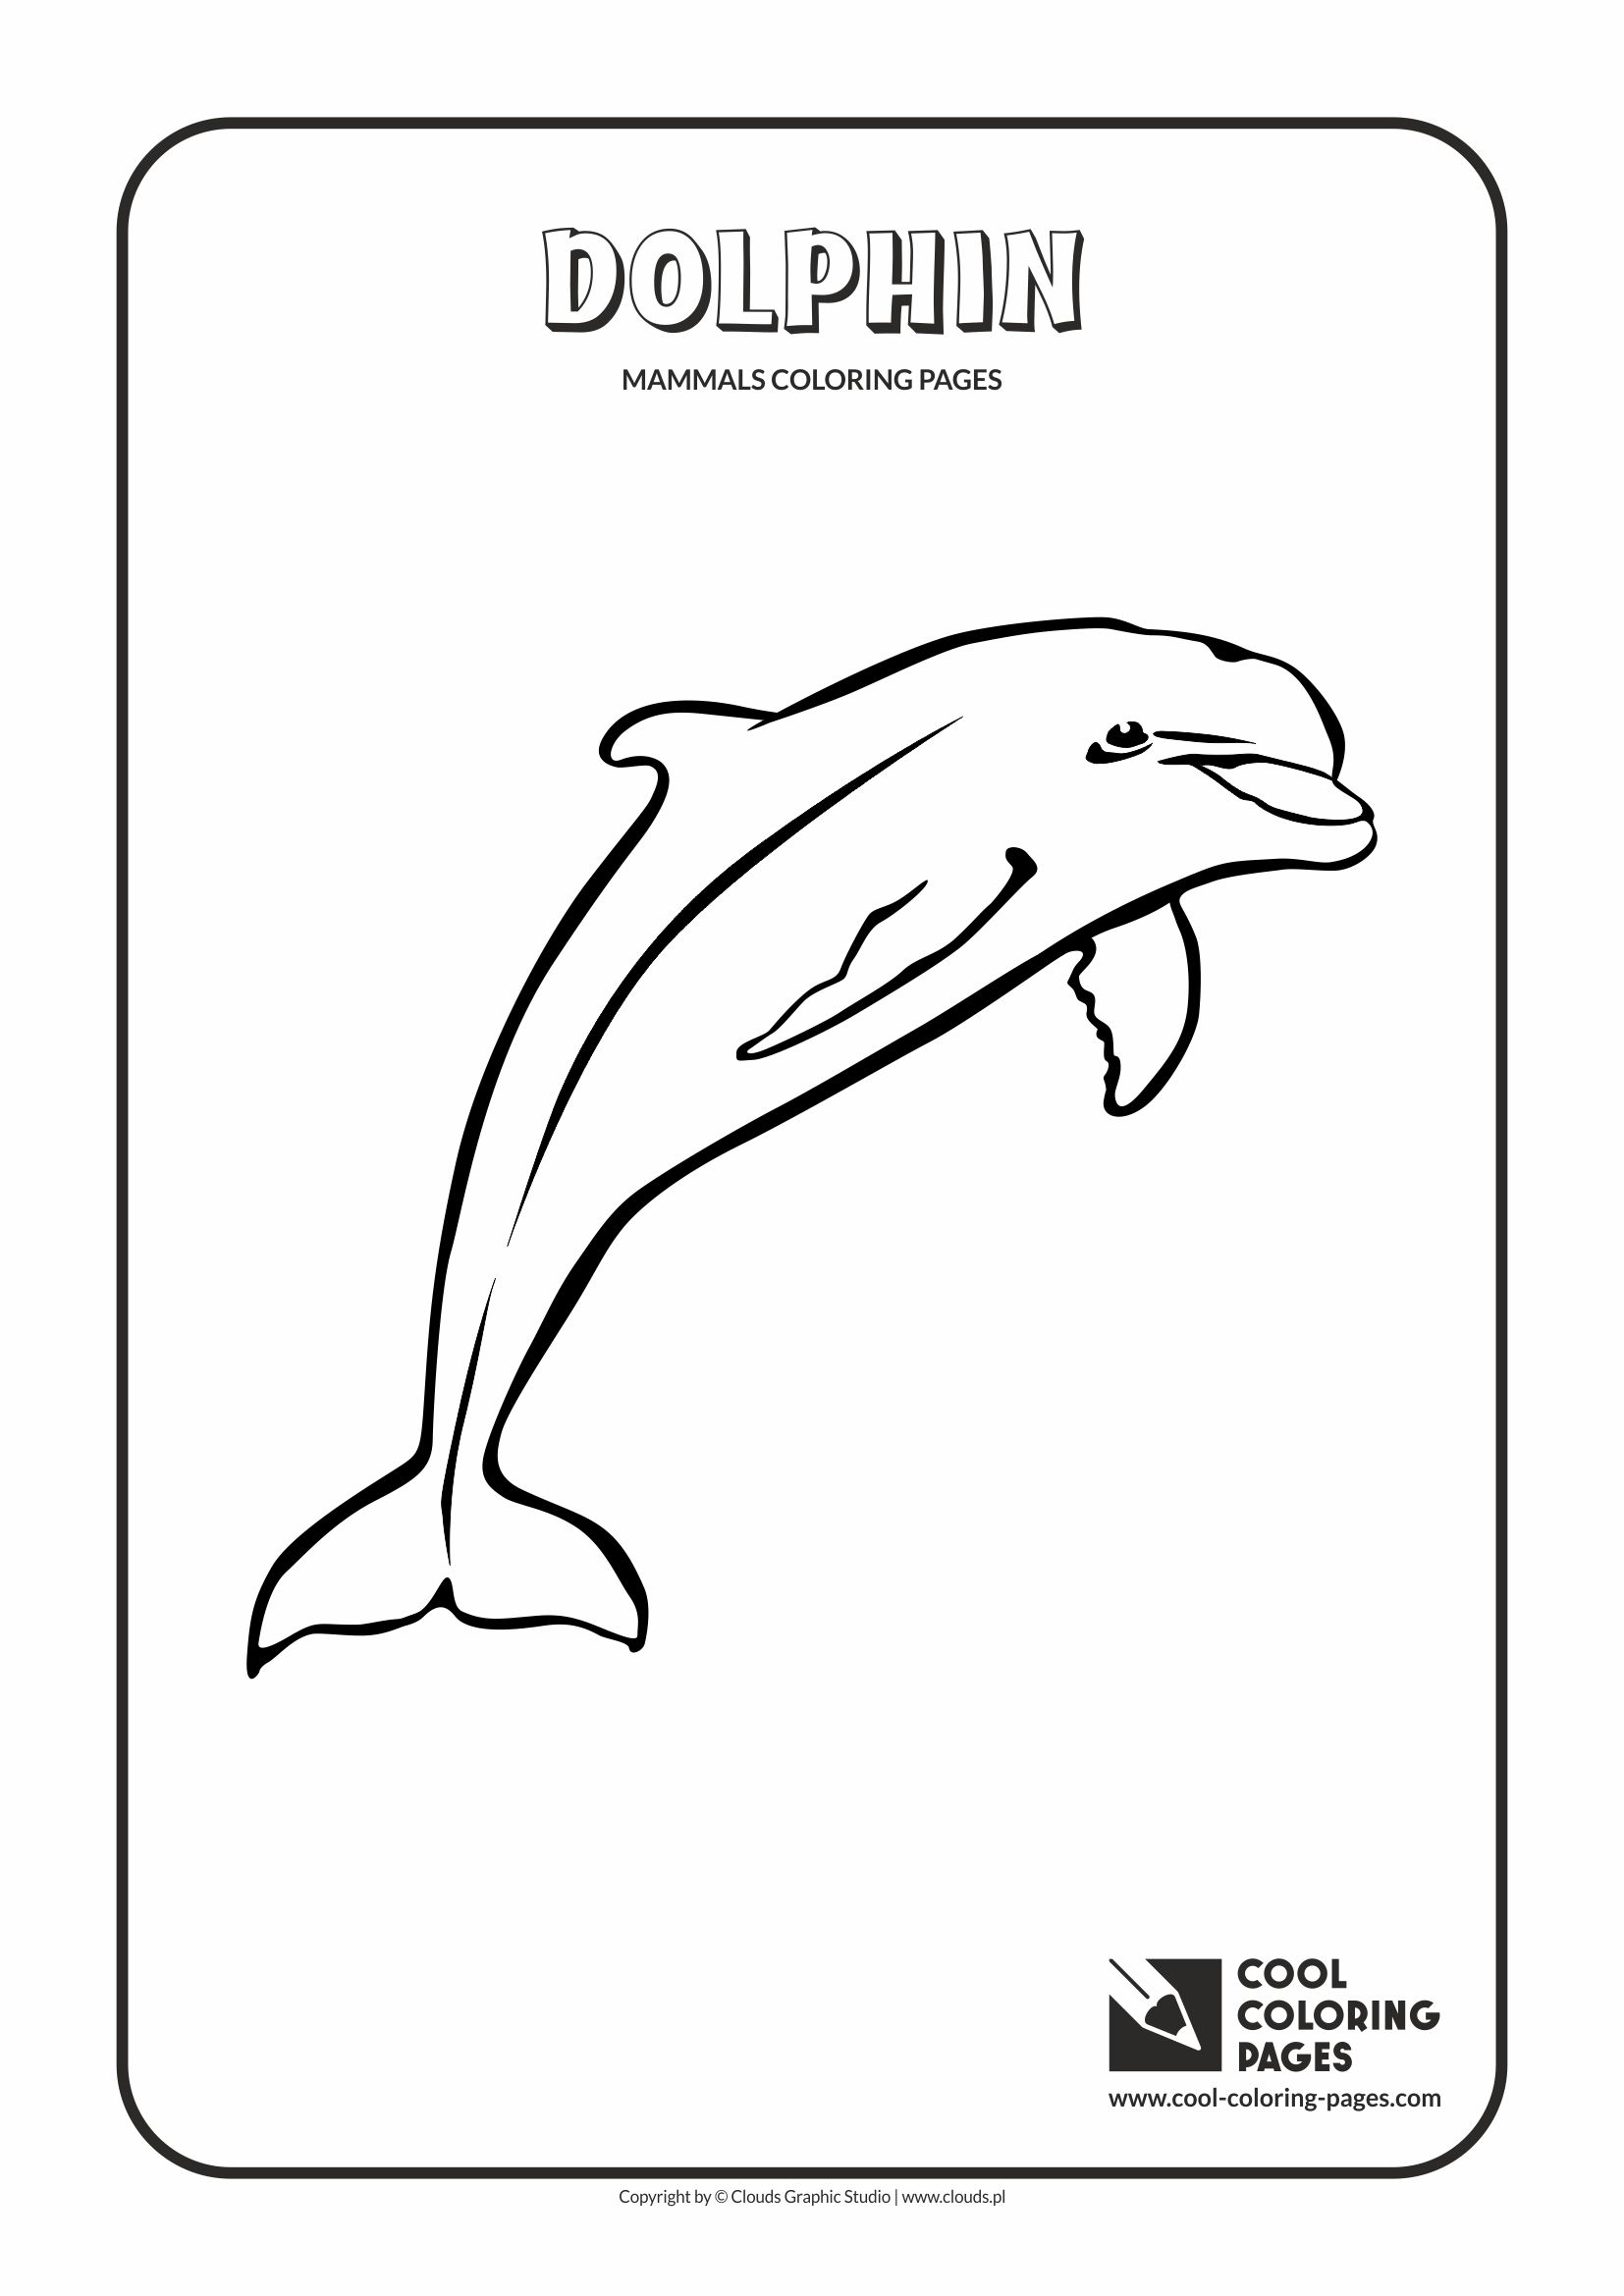 Cool Coloring Pages - Animals / Dolphin / Coloring page with dolphin